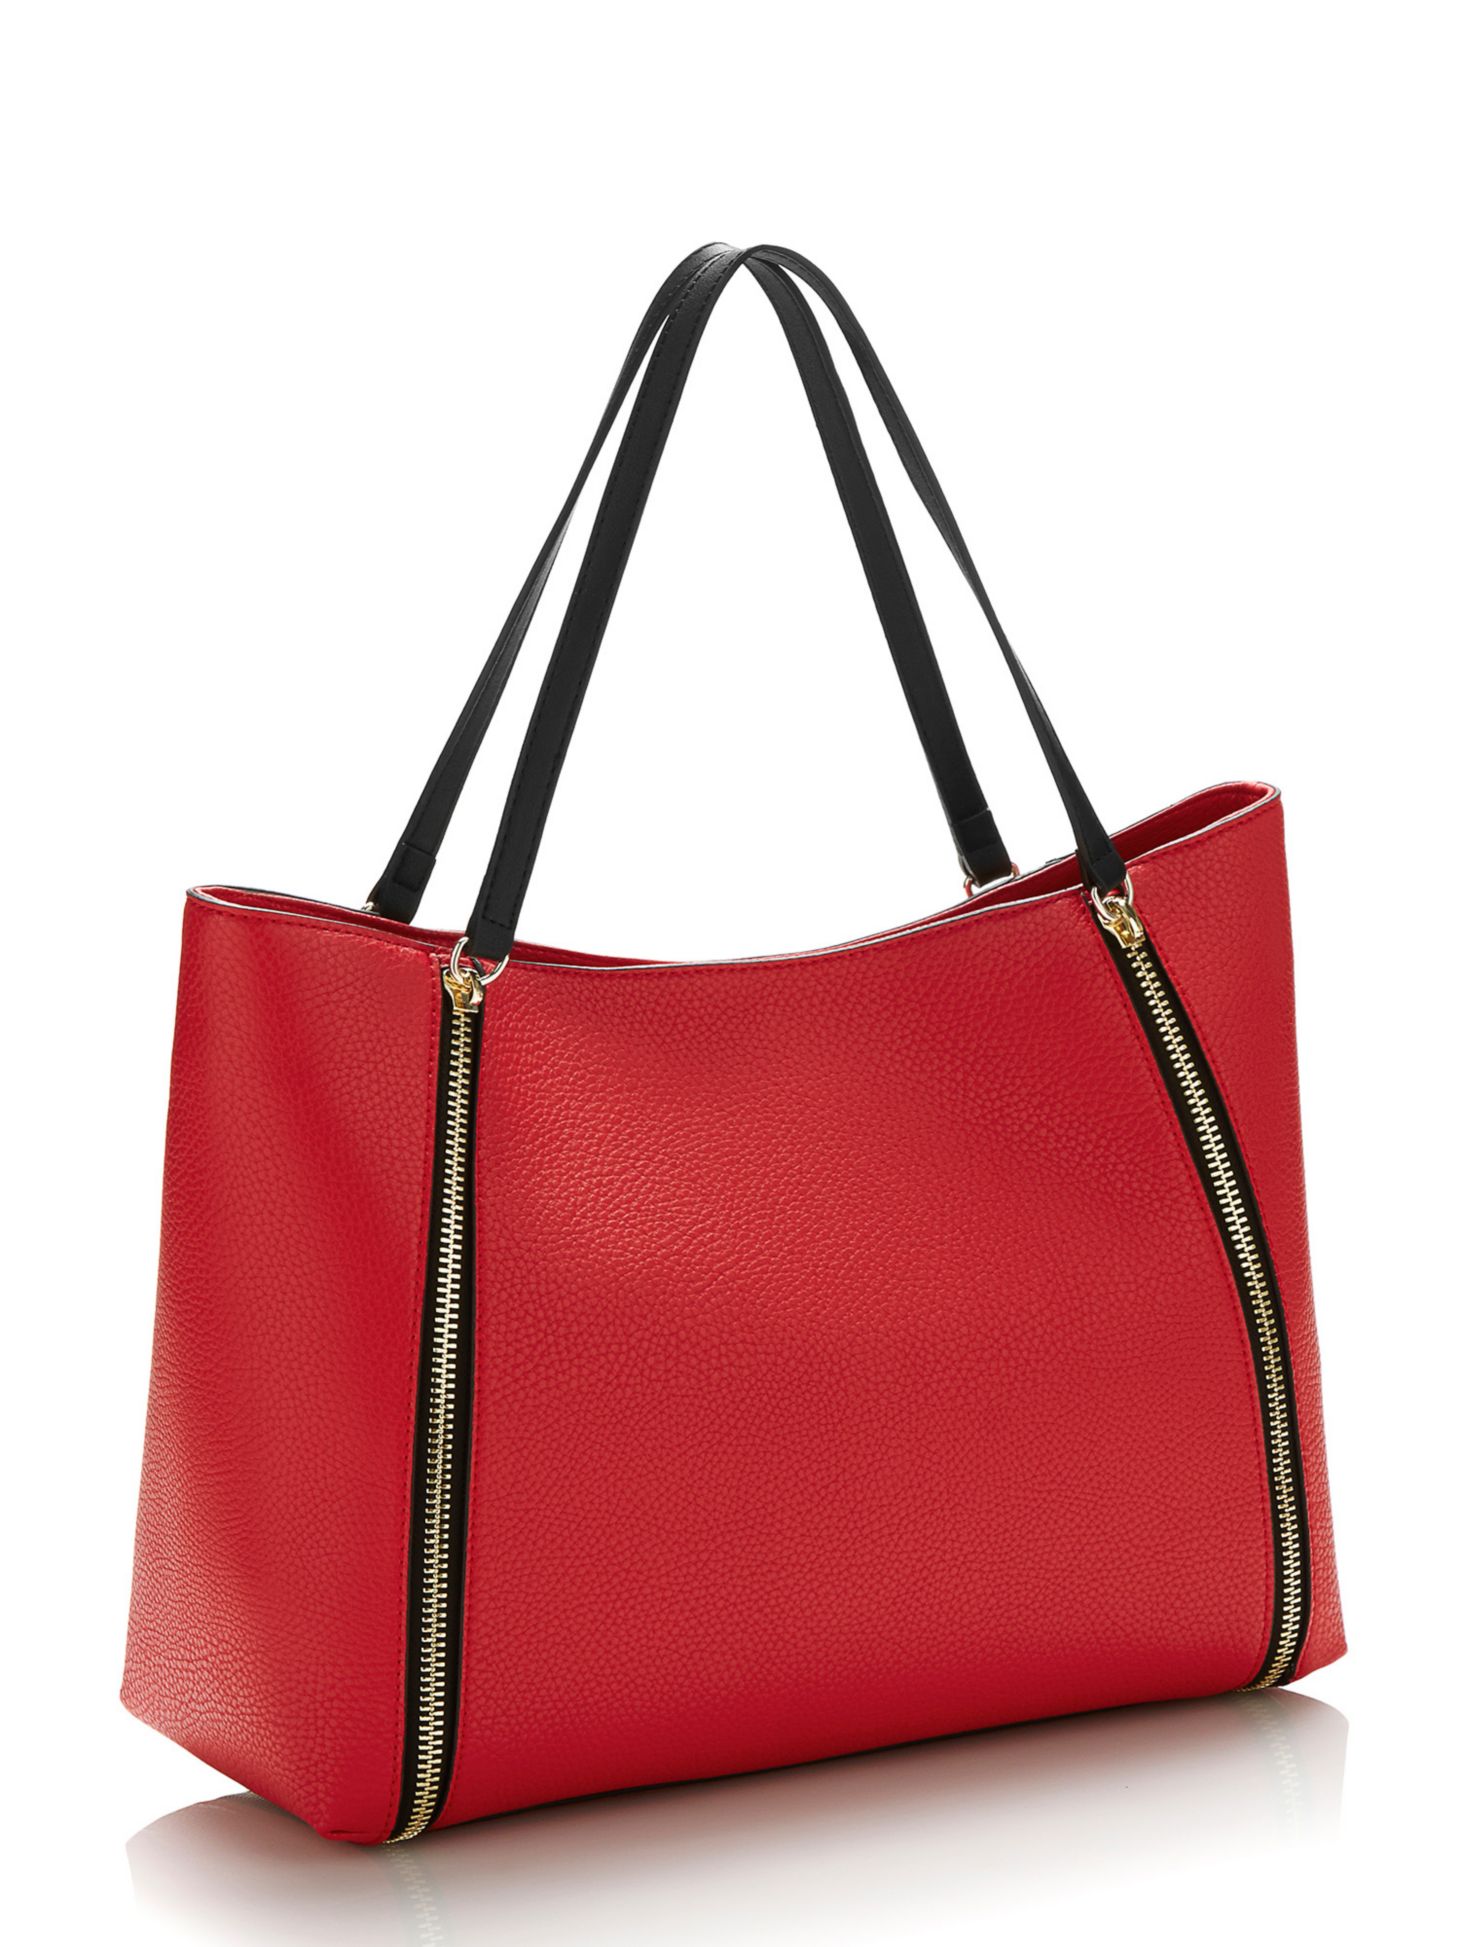 ANGIE BAG BY GUESS - THE EPITOME OF STYLISH VERSATILITY ...